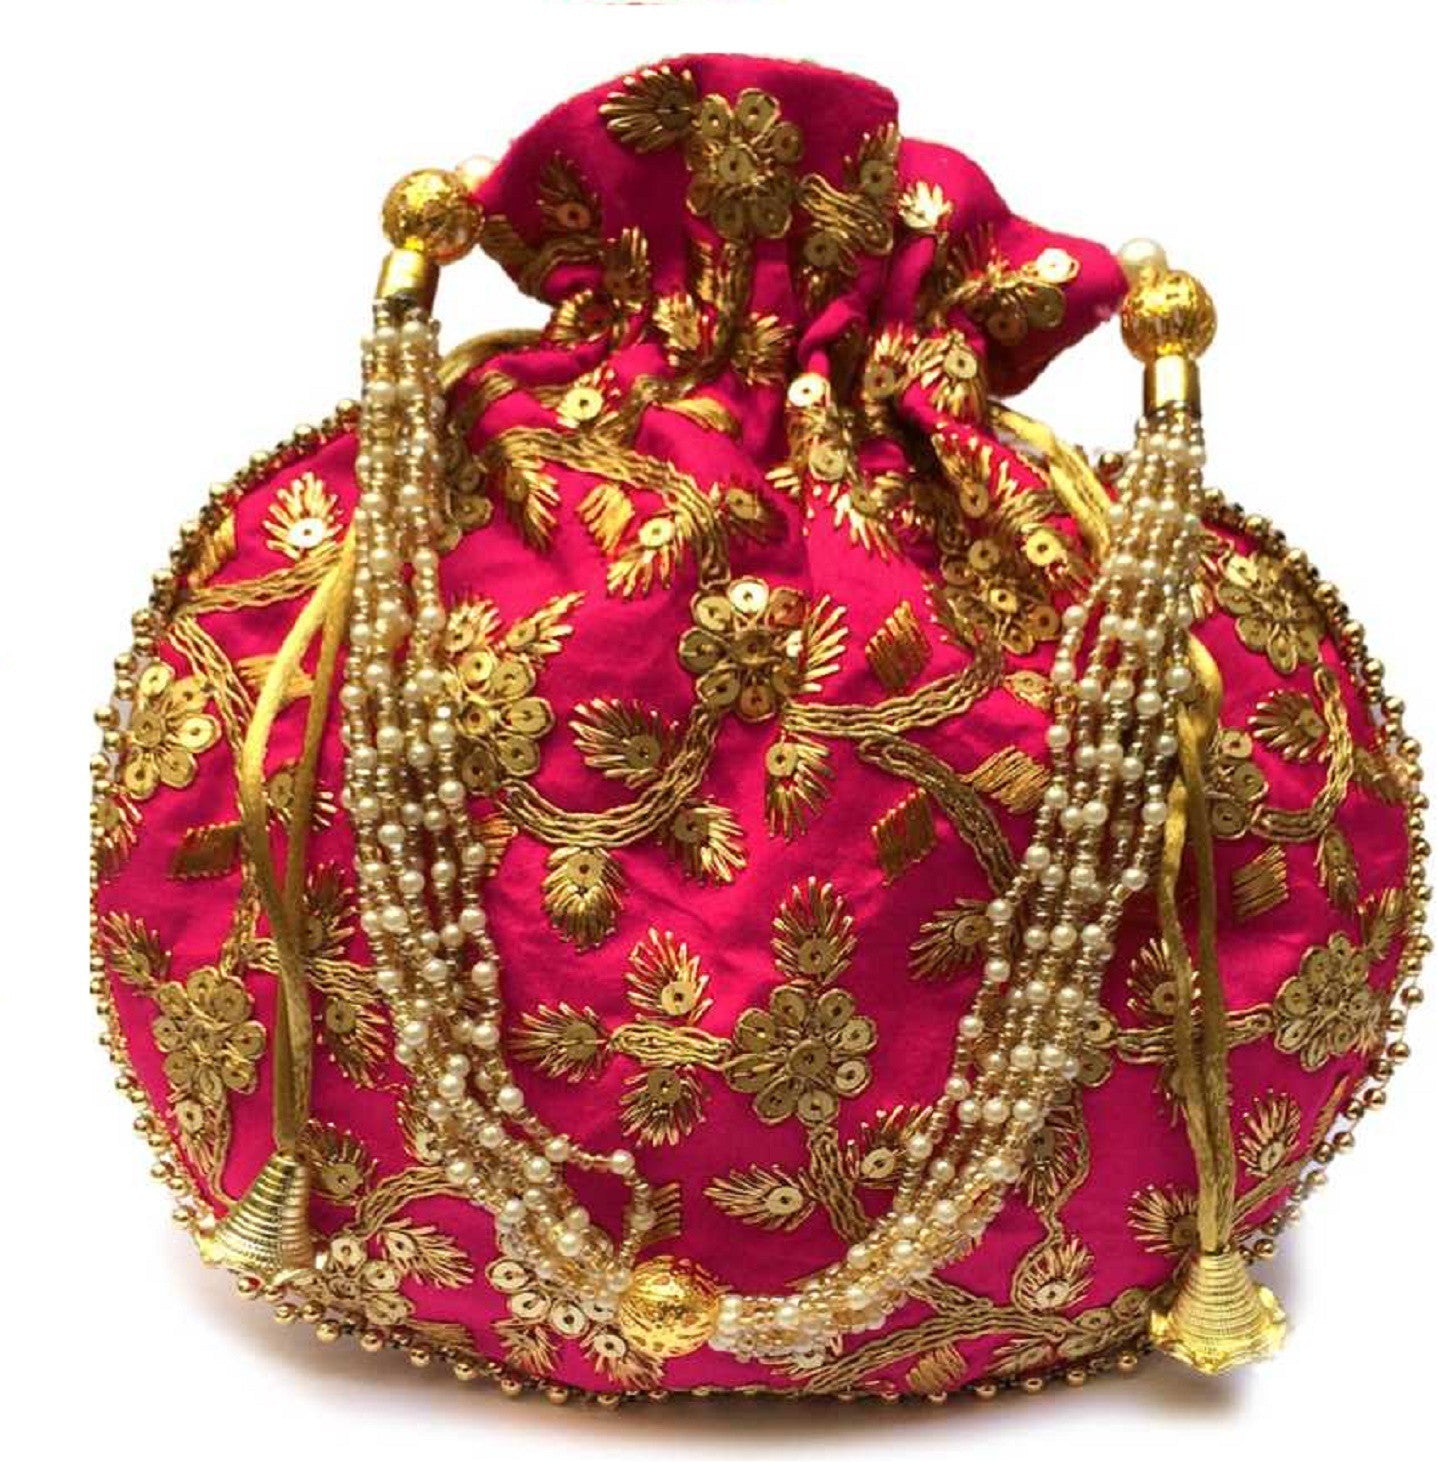 Women's Combo Of Clutch And Potli For Wedding - Ritzie